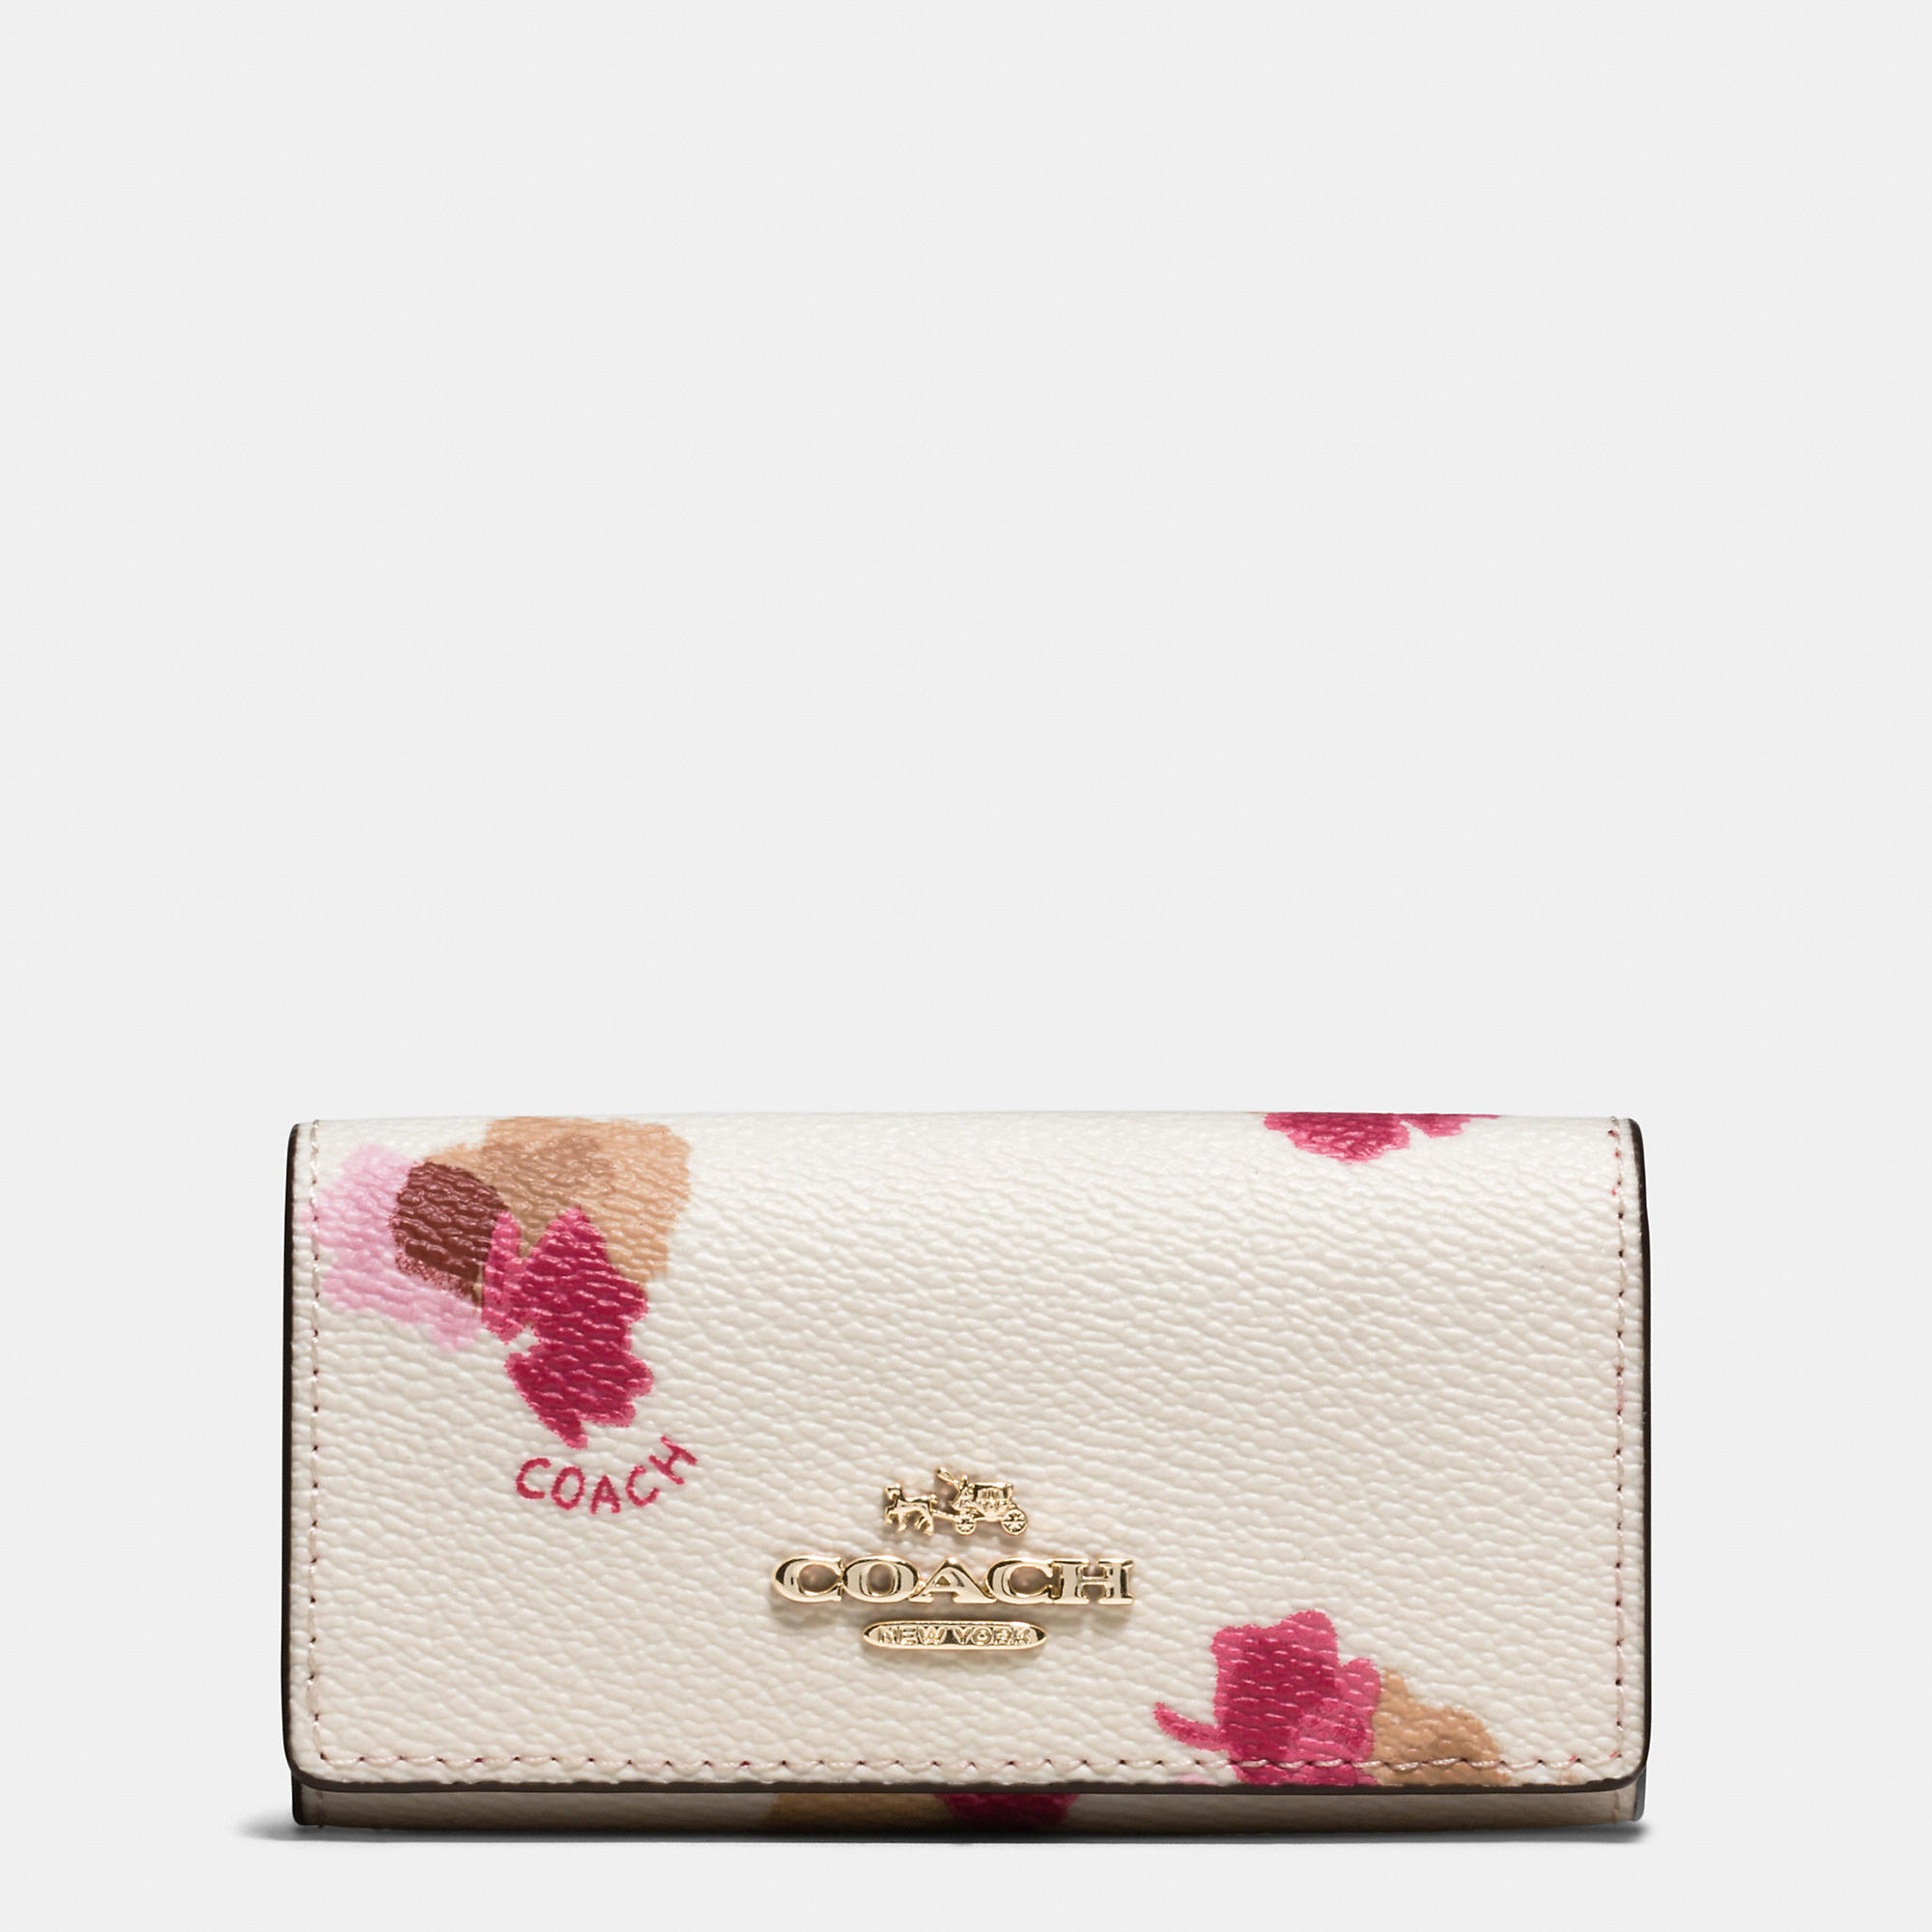 COACH 6 Ring Key Case In Floral Print Coated Canvas in White